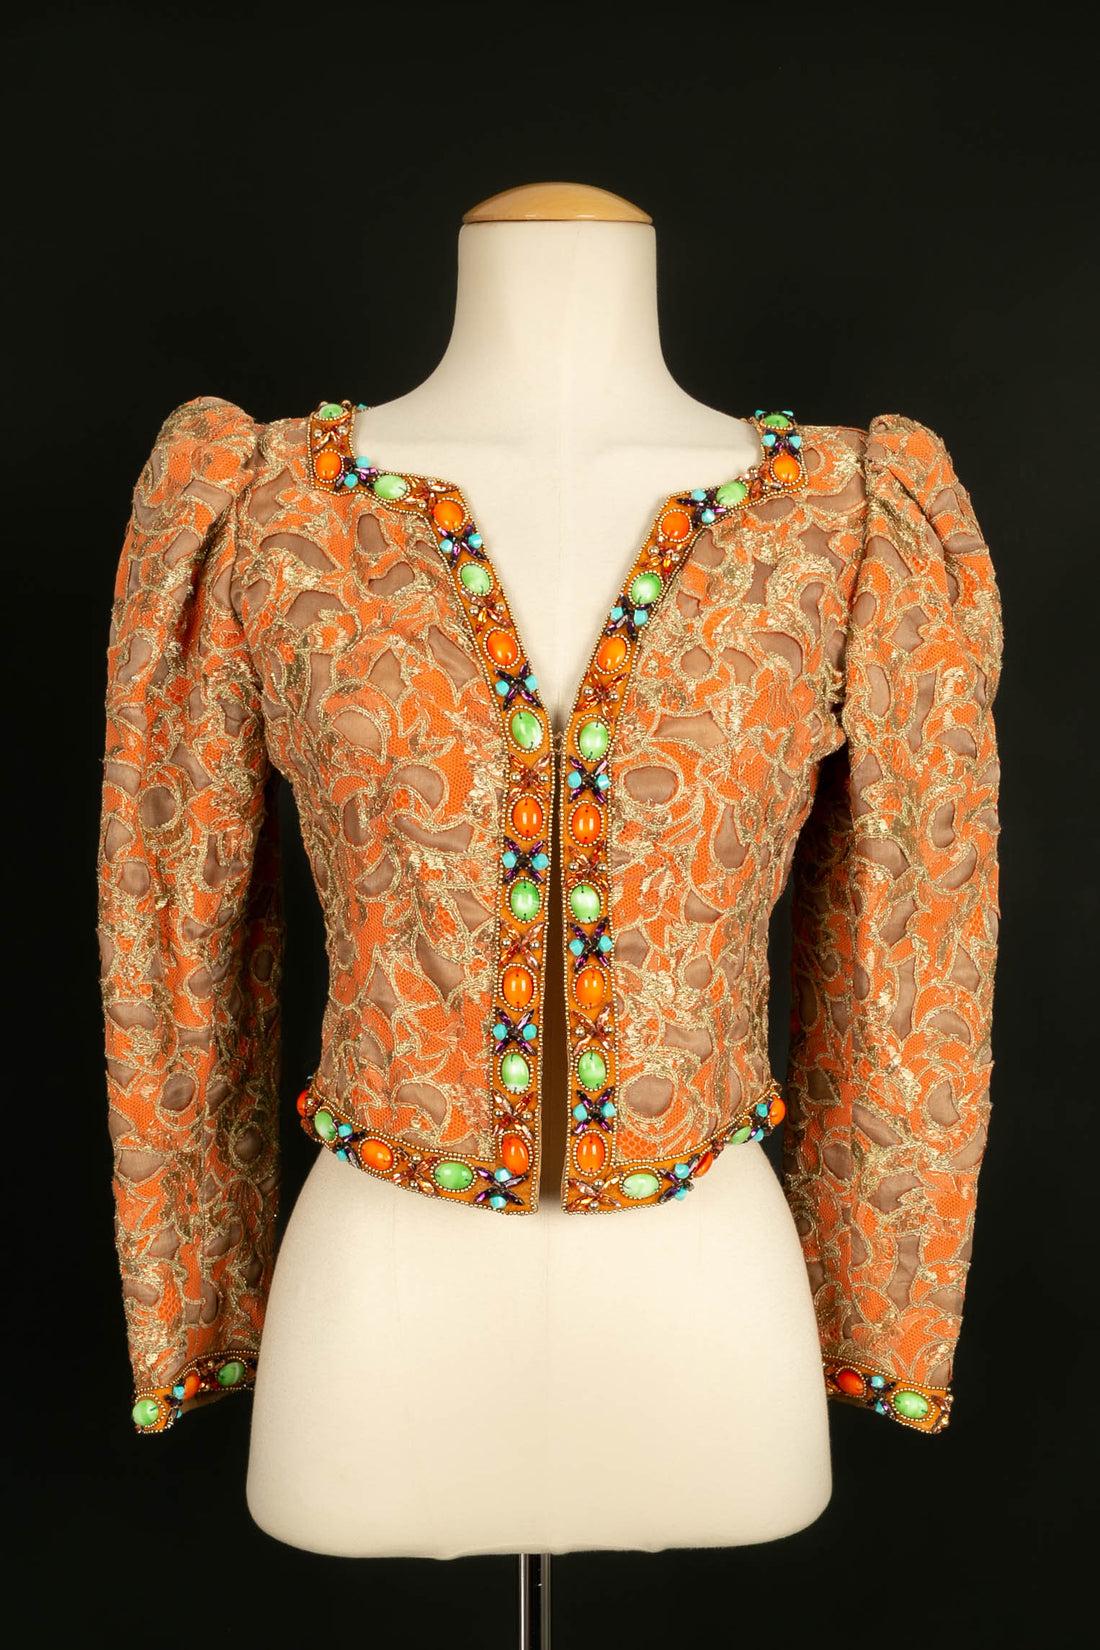 Ungaro Haute Embroidered with Flowers, Beads and Rhinestones Couture Set For Sale 10